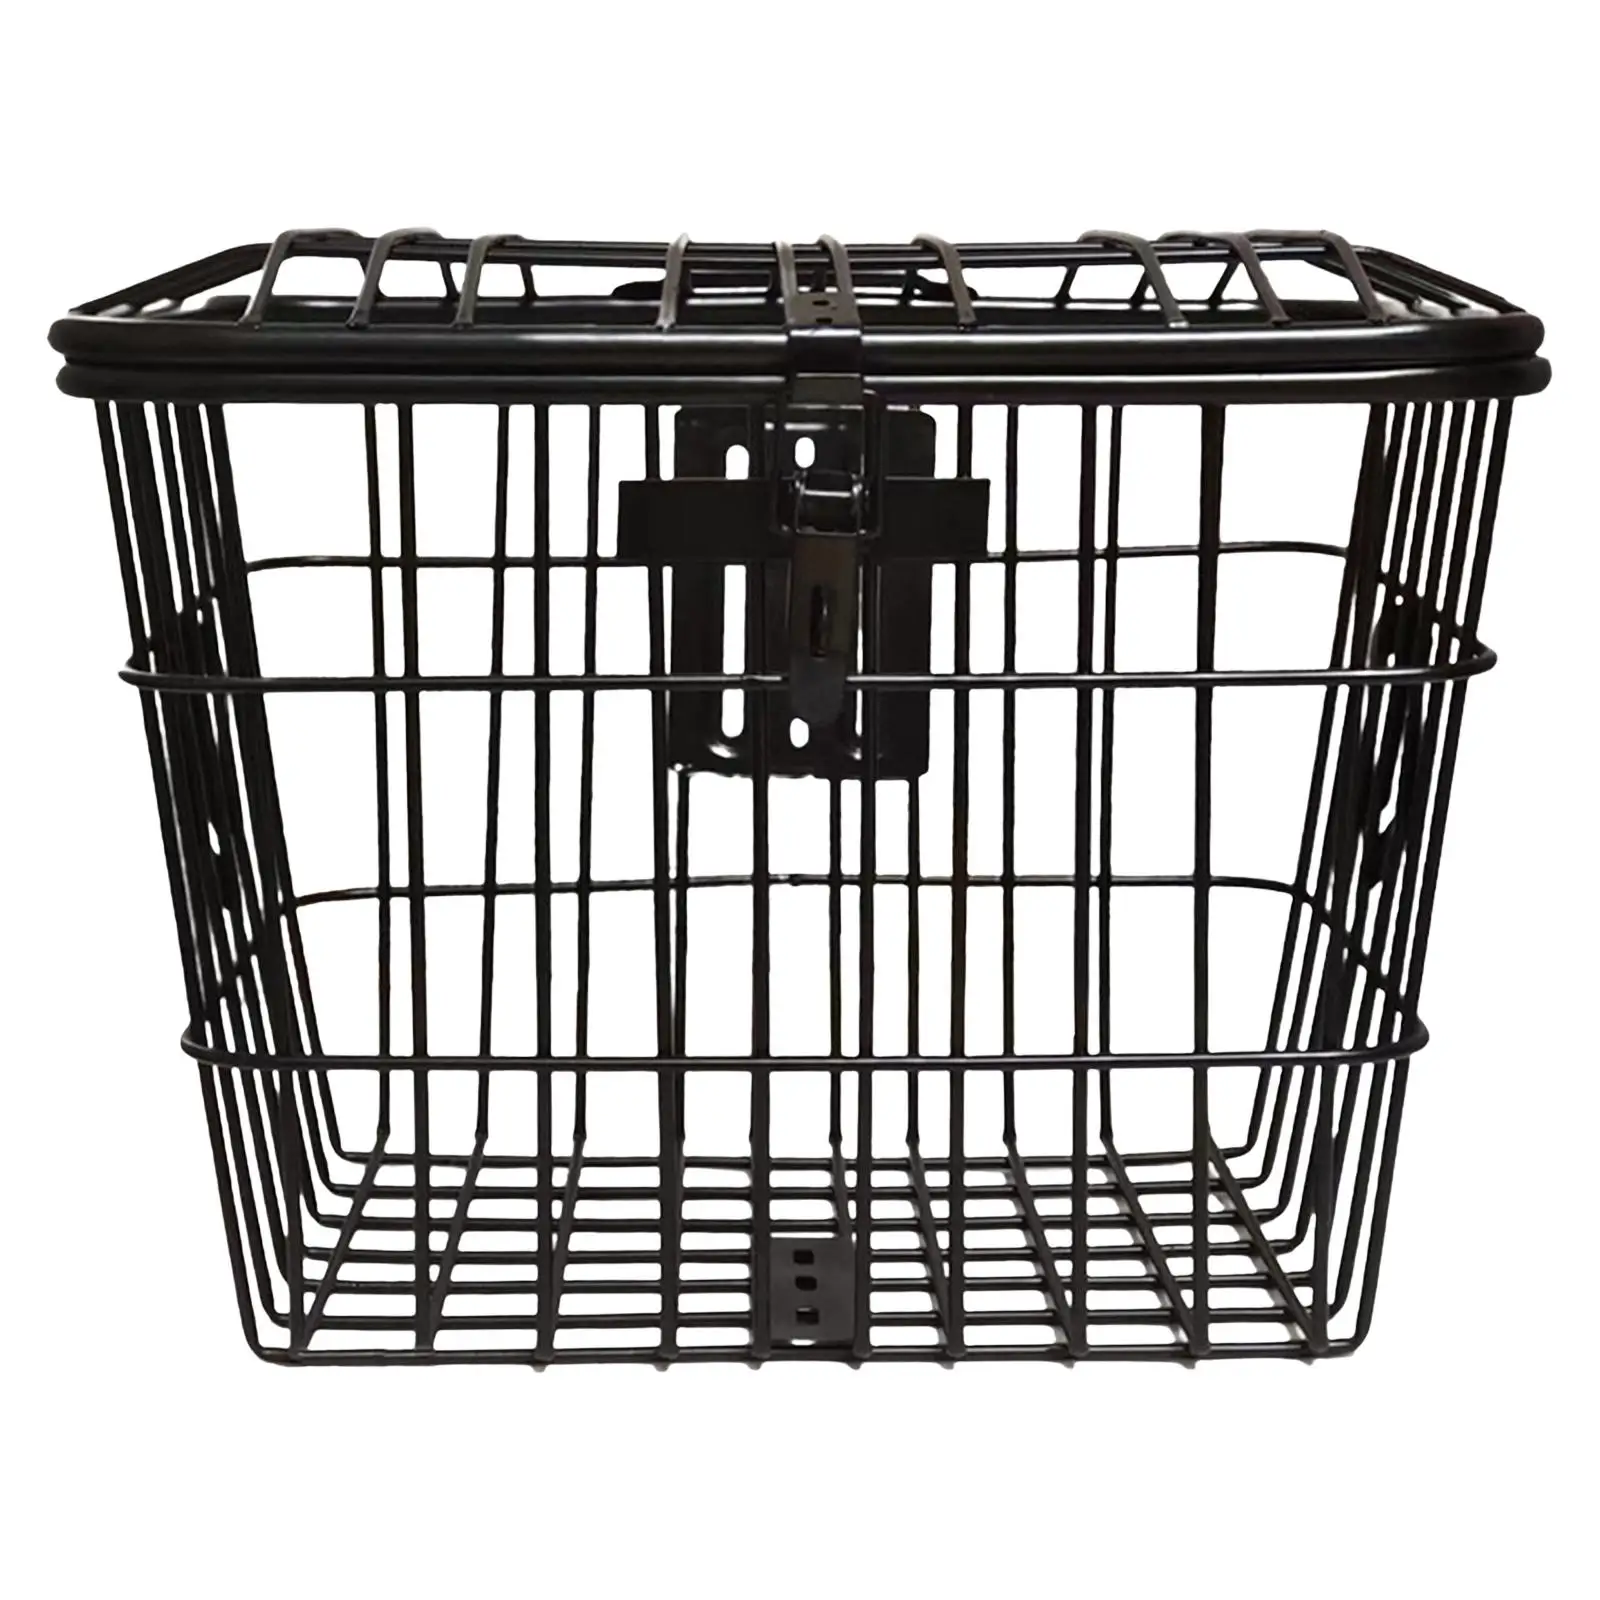 Front Rear Bike Basket Cargo Rack Storage Box Large Space with Mounting Screws Durable for Tricycles Mountain Bikes Scooters